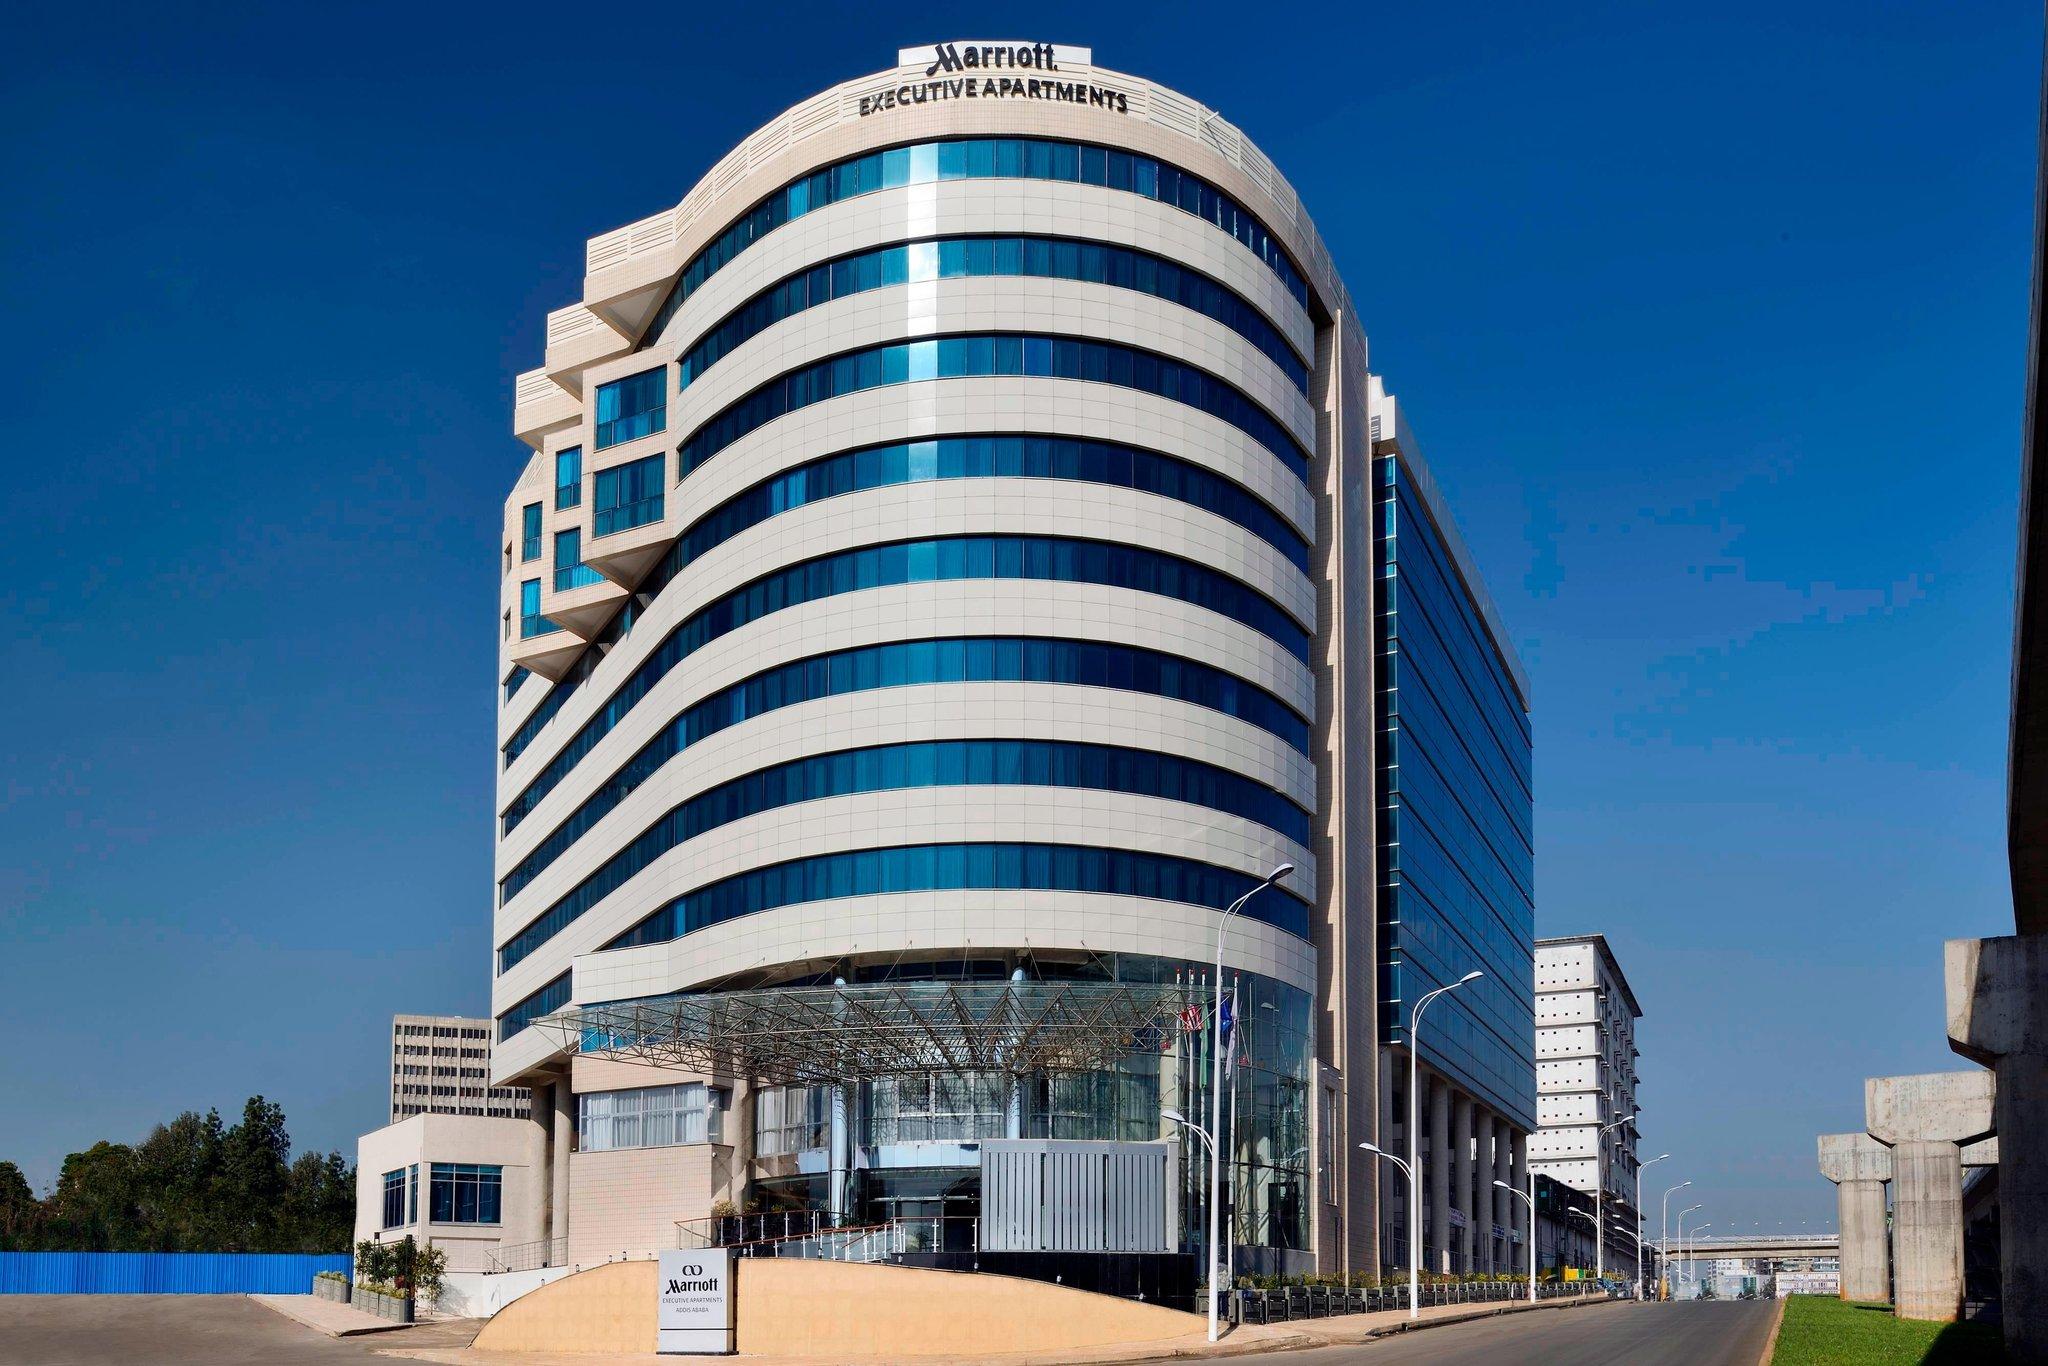 Marriott Executive Apartments Addis Ababa in Addis Ababa, ET